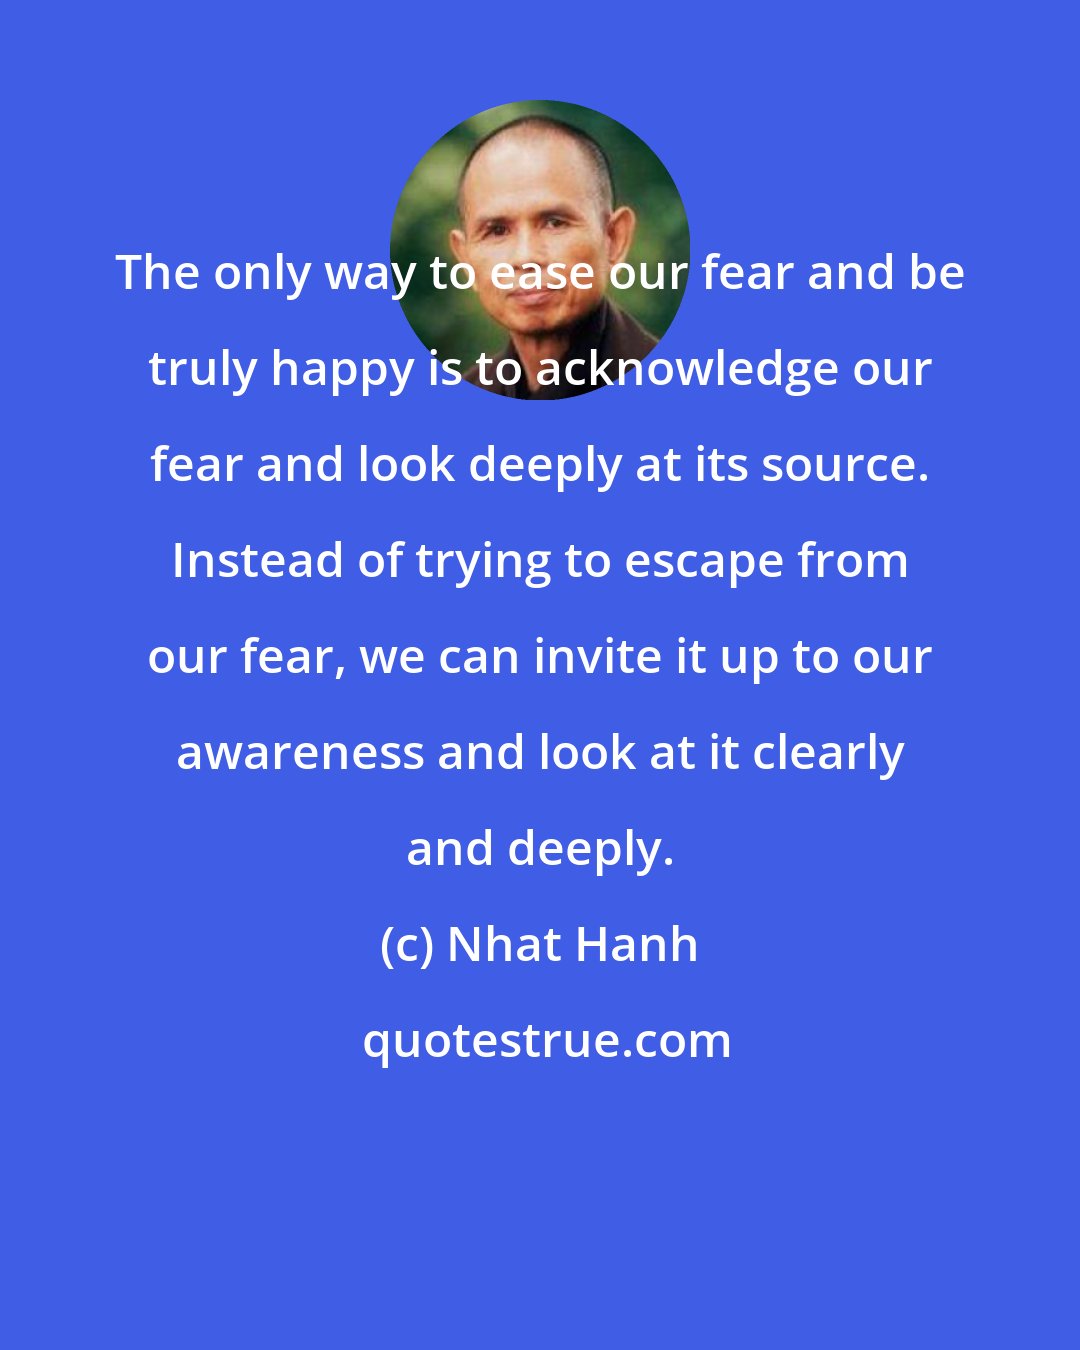 Nhat Hanh: The only way to ease our fear and be truly happy is to acknowledge our fear and look deeply at its source. Instead of trying to escape from our fear, we can invite it up to our awareness and look at it clearly and deeply.